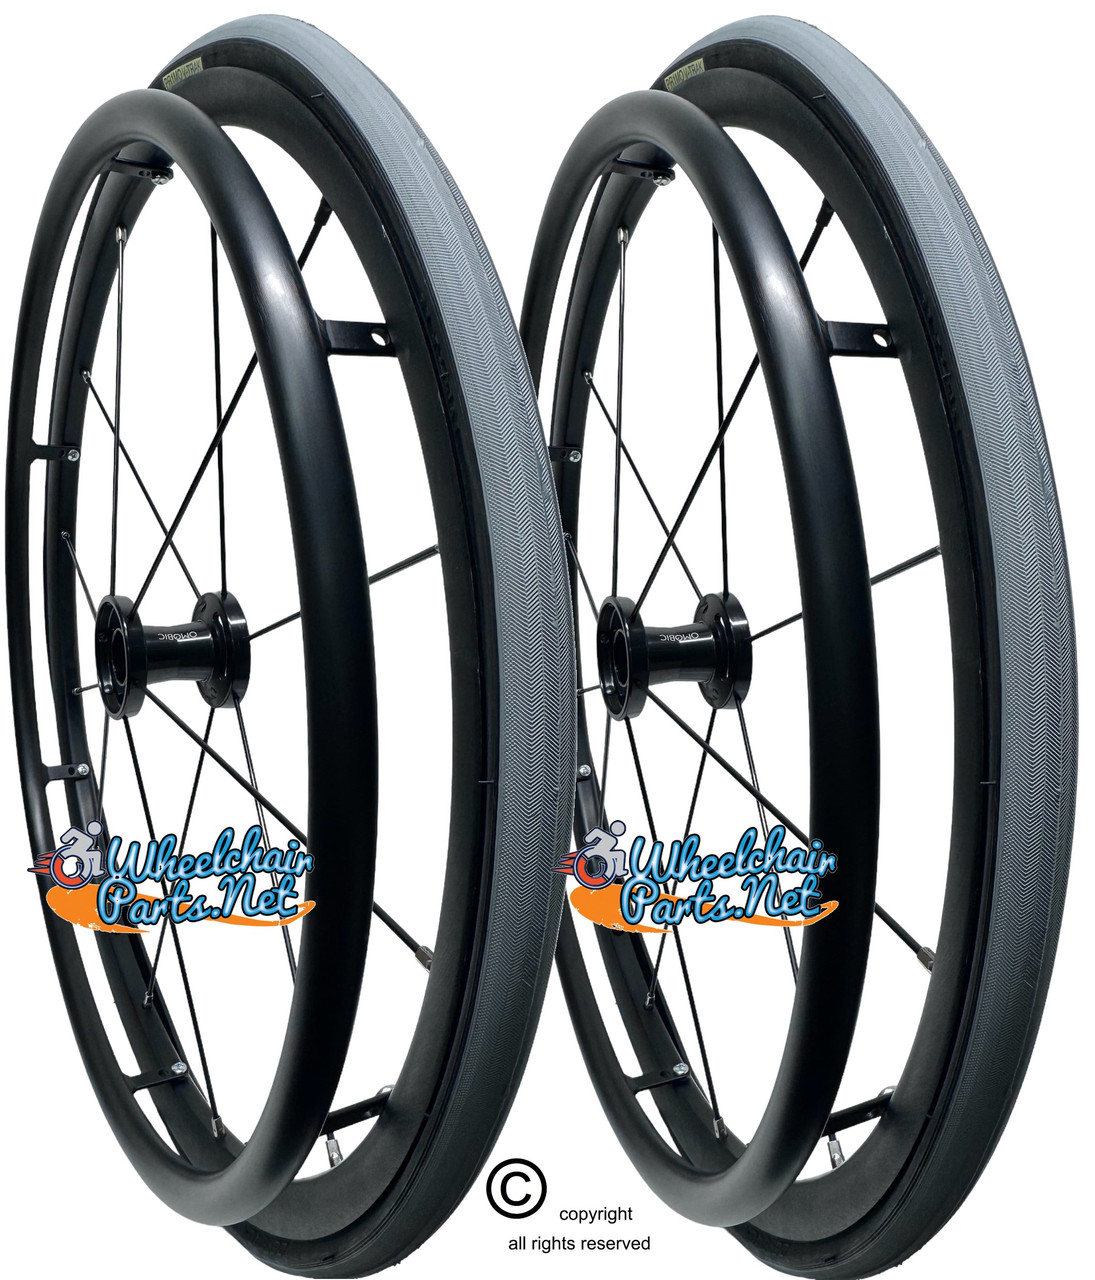 24" x 1" 12 Spoke, Cyclone Omobic Wheel With Primo Racer Tire. Set of 2